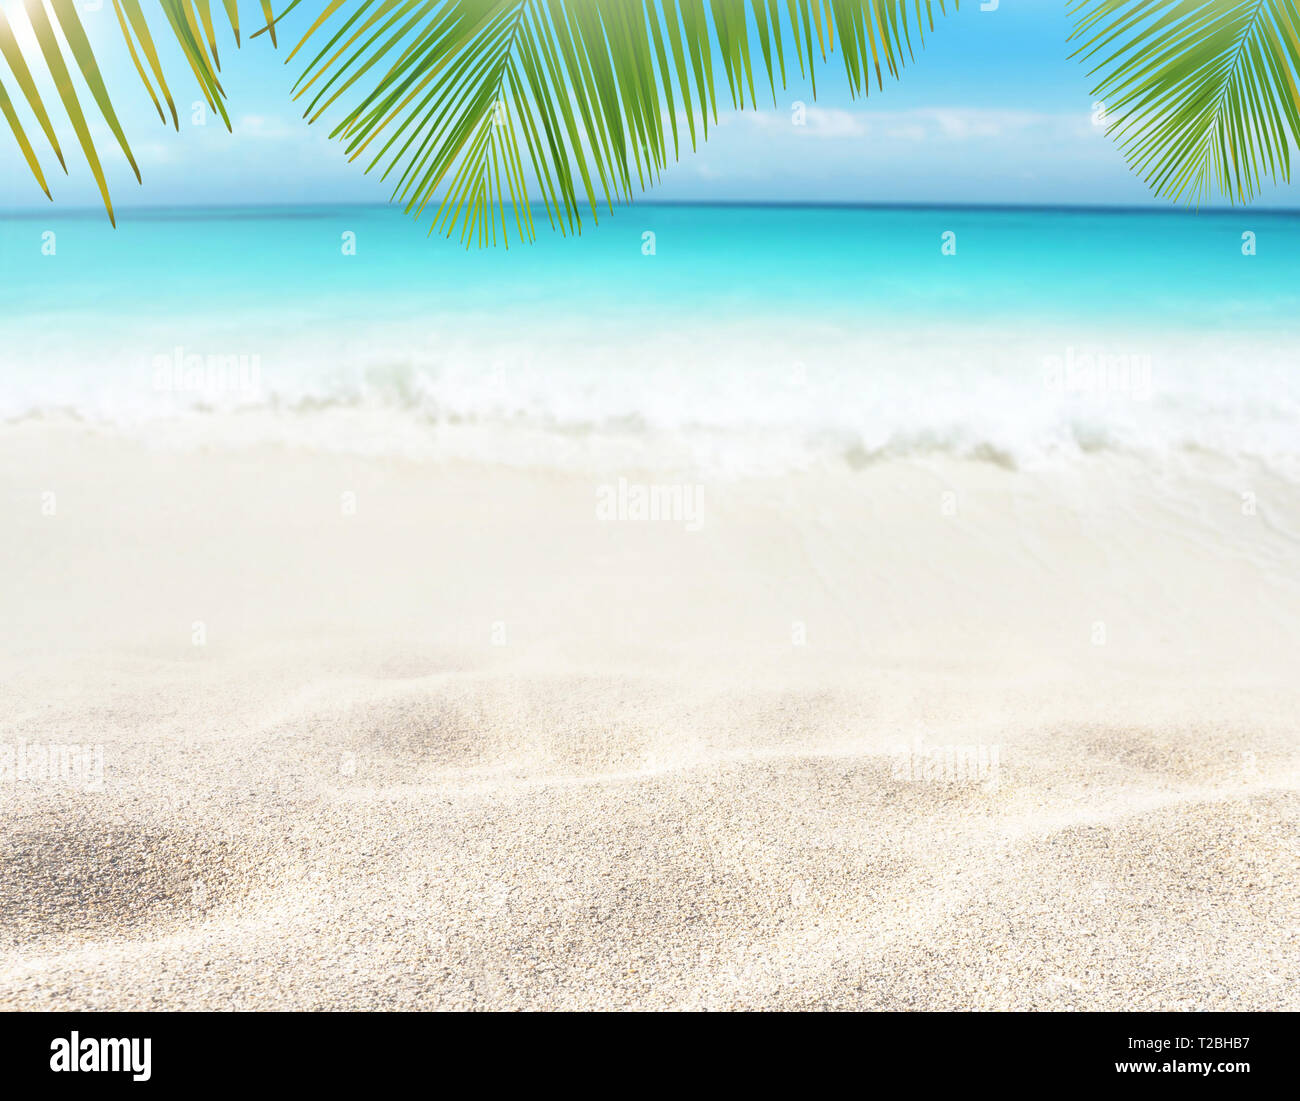 Coconut palm leaves hanging over the sandy beach. Tropical island paradise. Bright turquoise ocean water. Sandy shore washing by the wave. Dreams summ Stock Photo